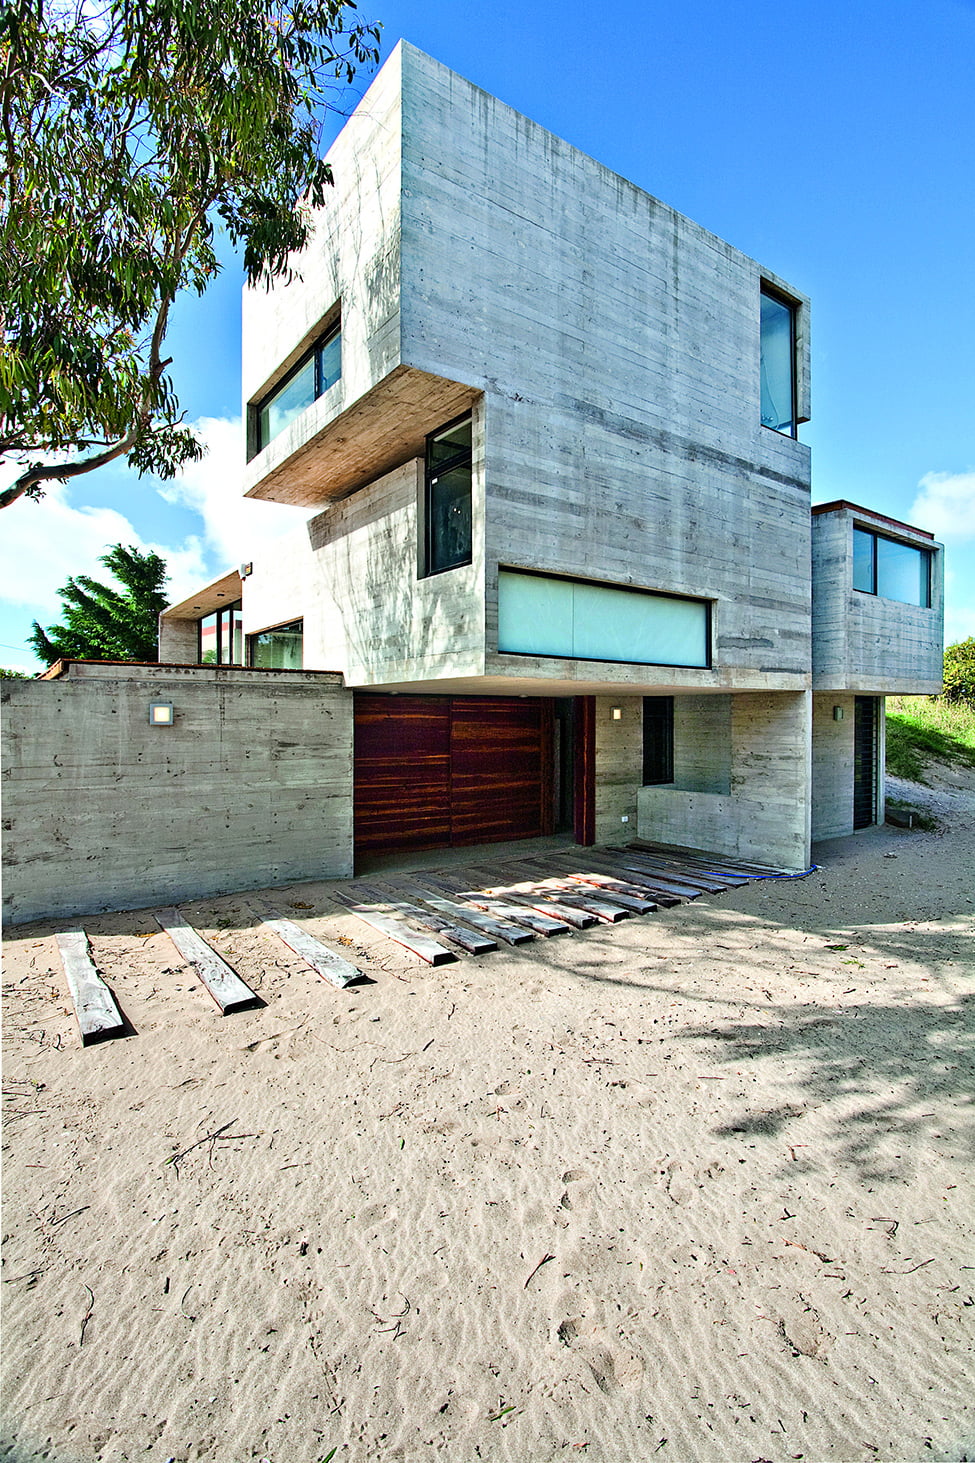 Industrial-Aesthetic-Values-in-a-Beach-Home-by-BAK-Architects-2